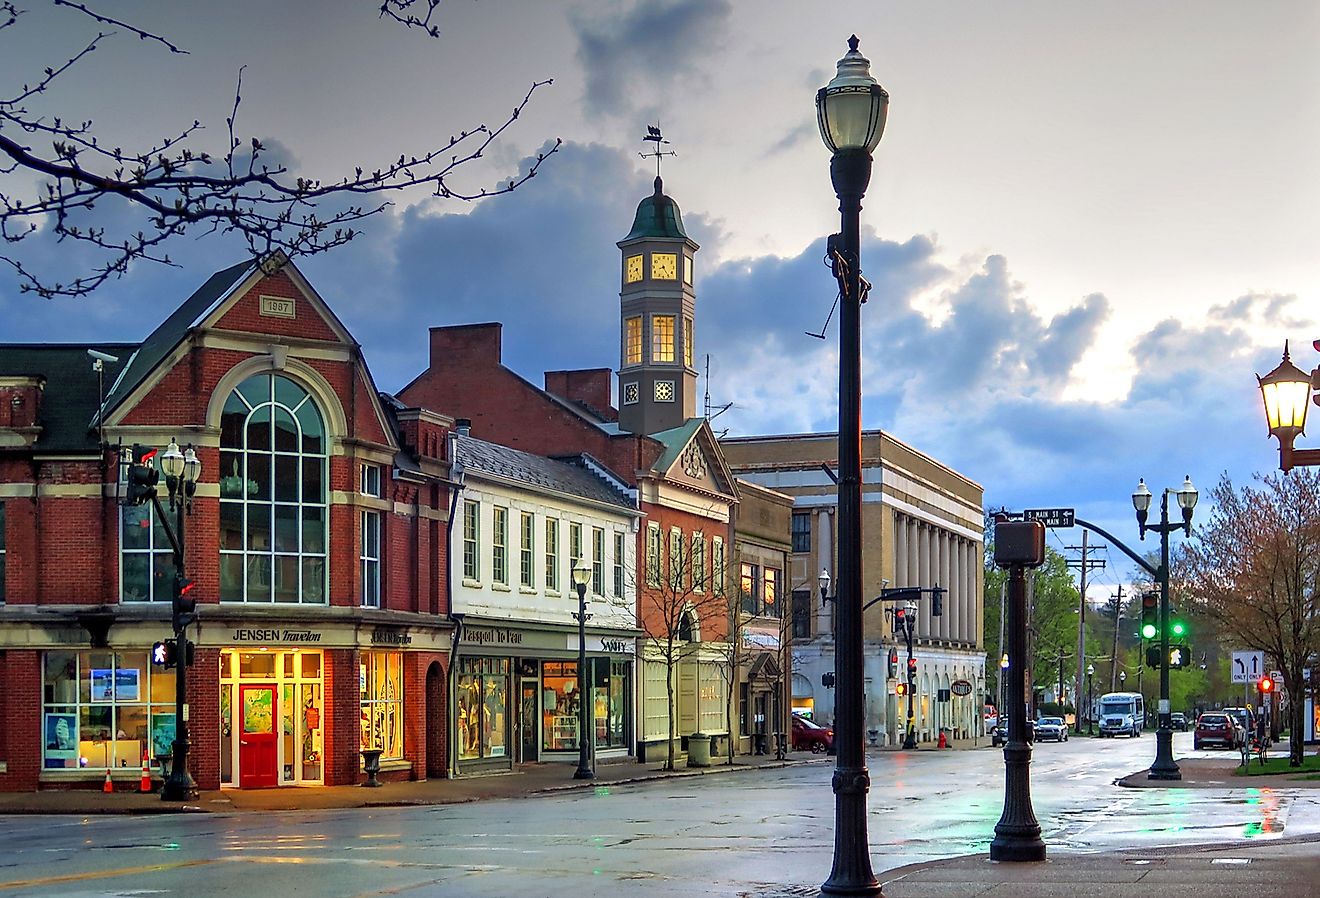 East Washington Street in the Village on a cold wet spring evening, Chagrin Falls, Ohio. Image credit Lynne Neuman via Shutterstock